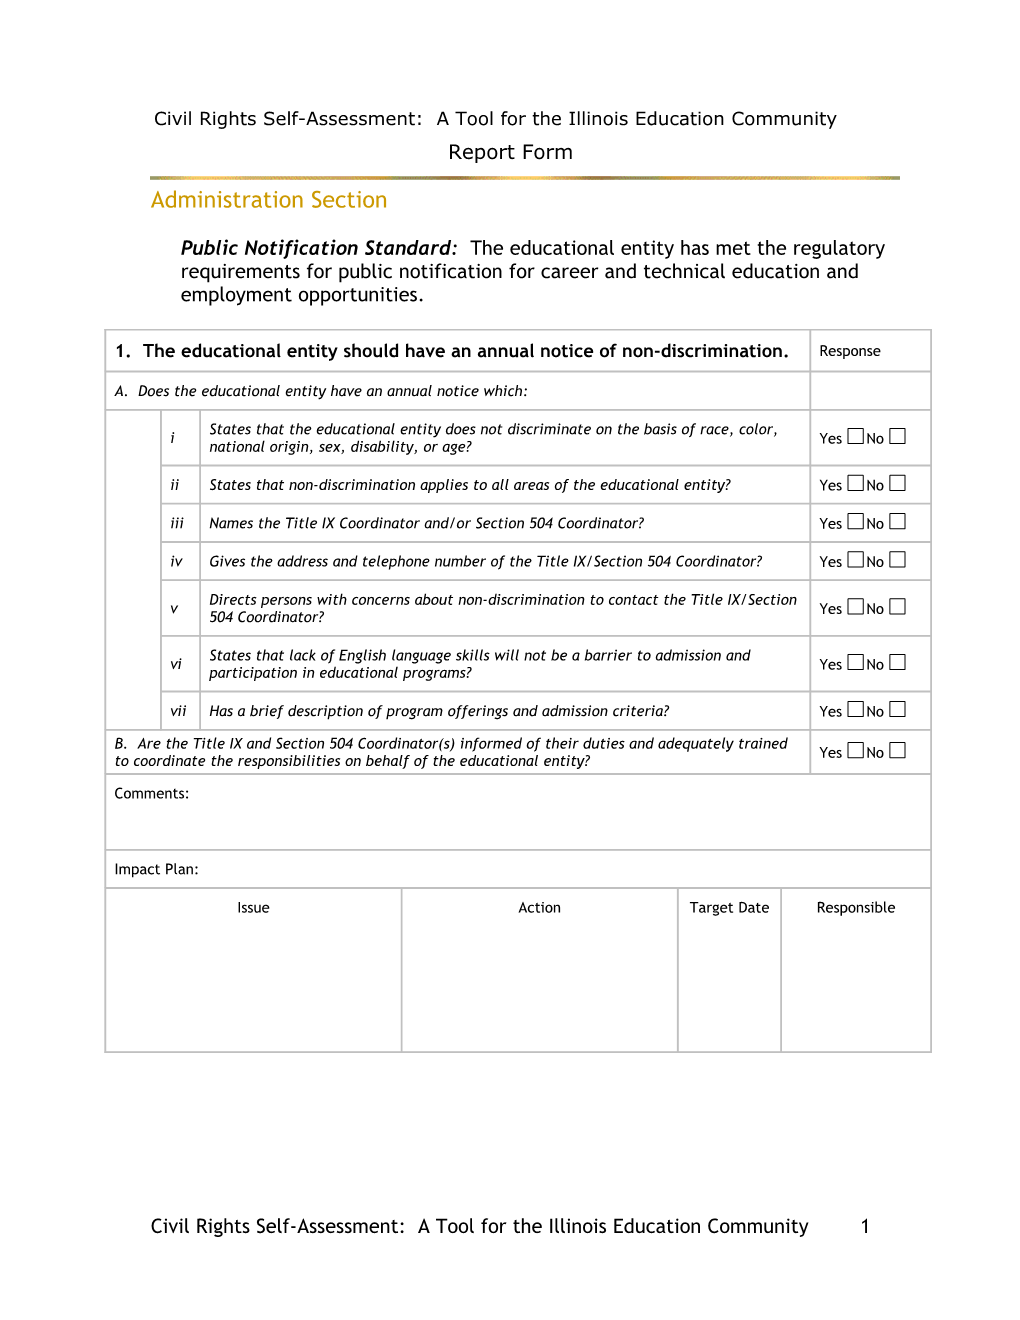 Office of Civil Rights Self-Assessment Tool